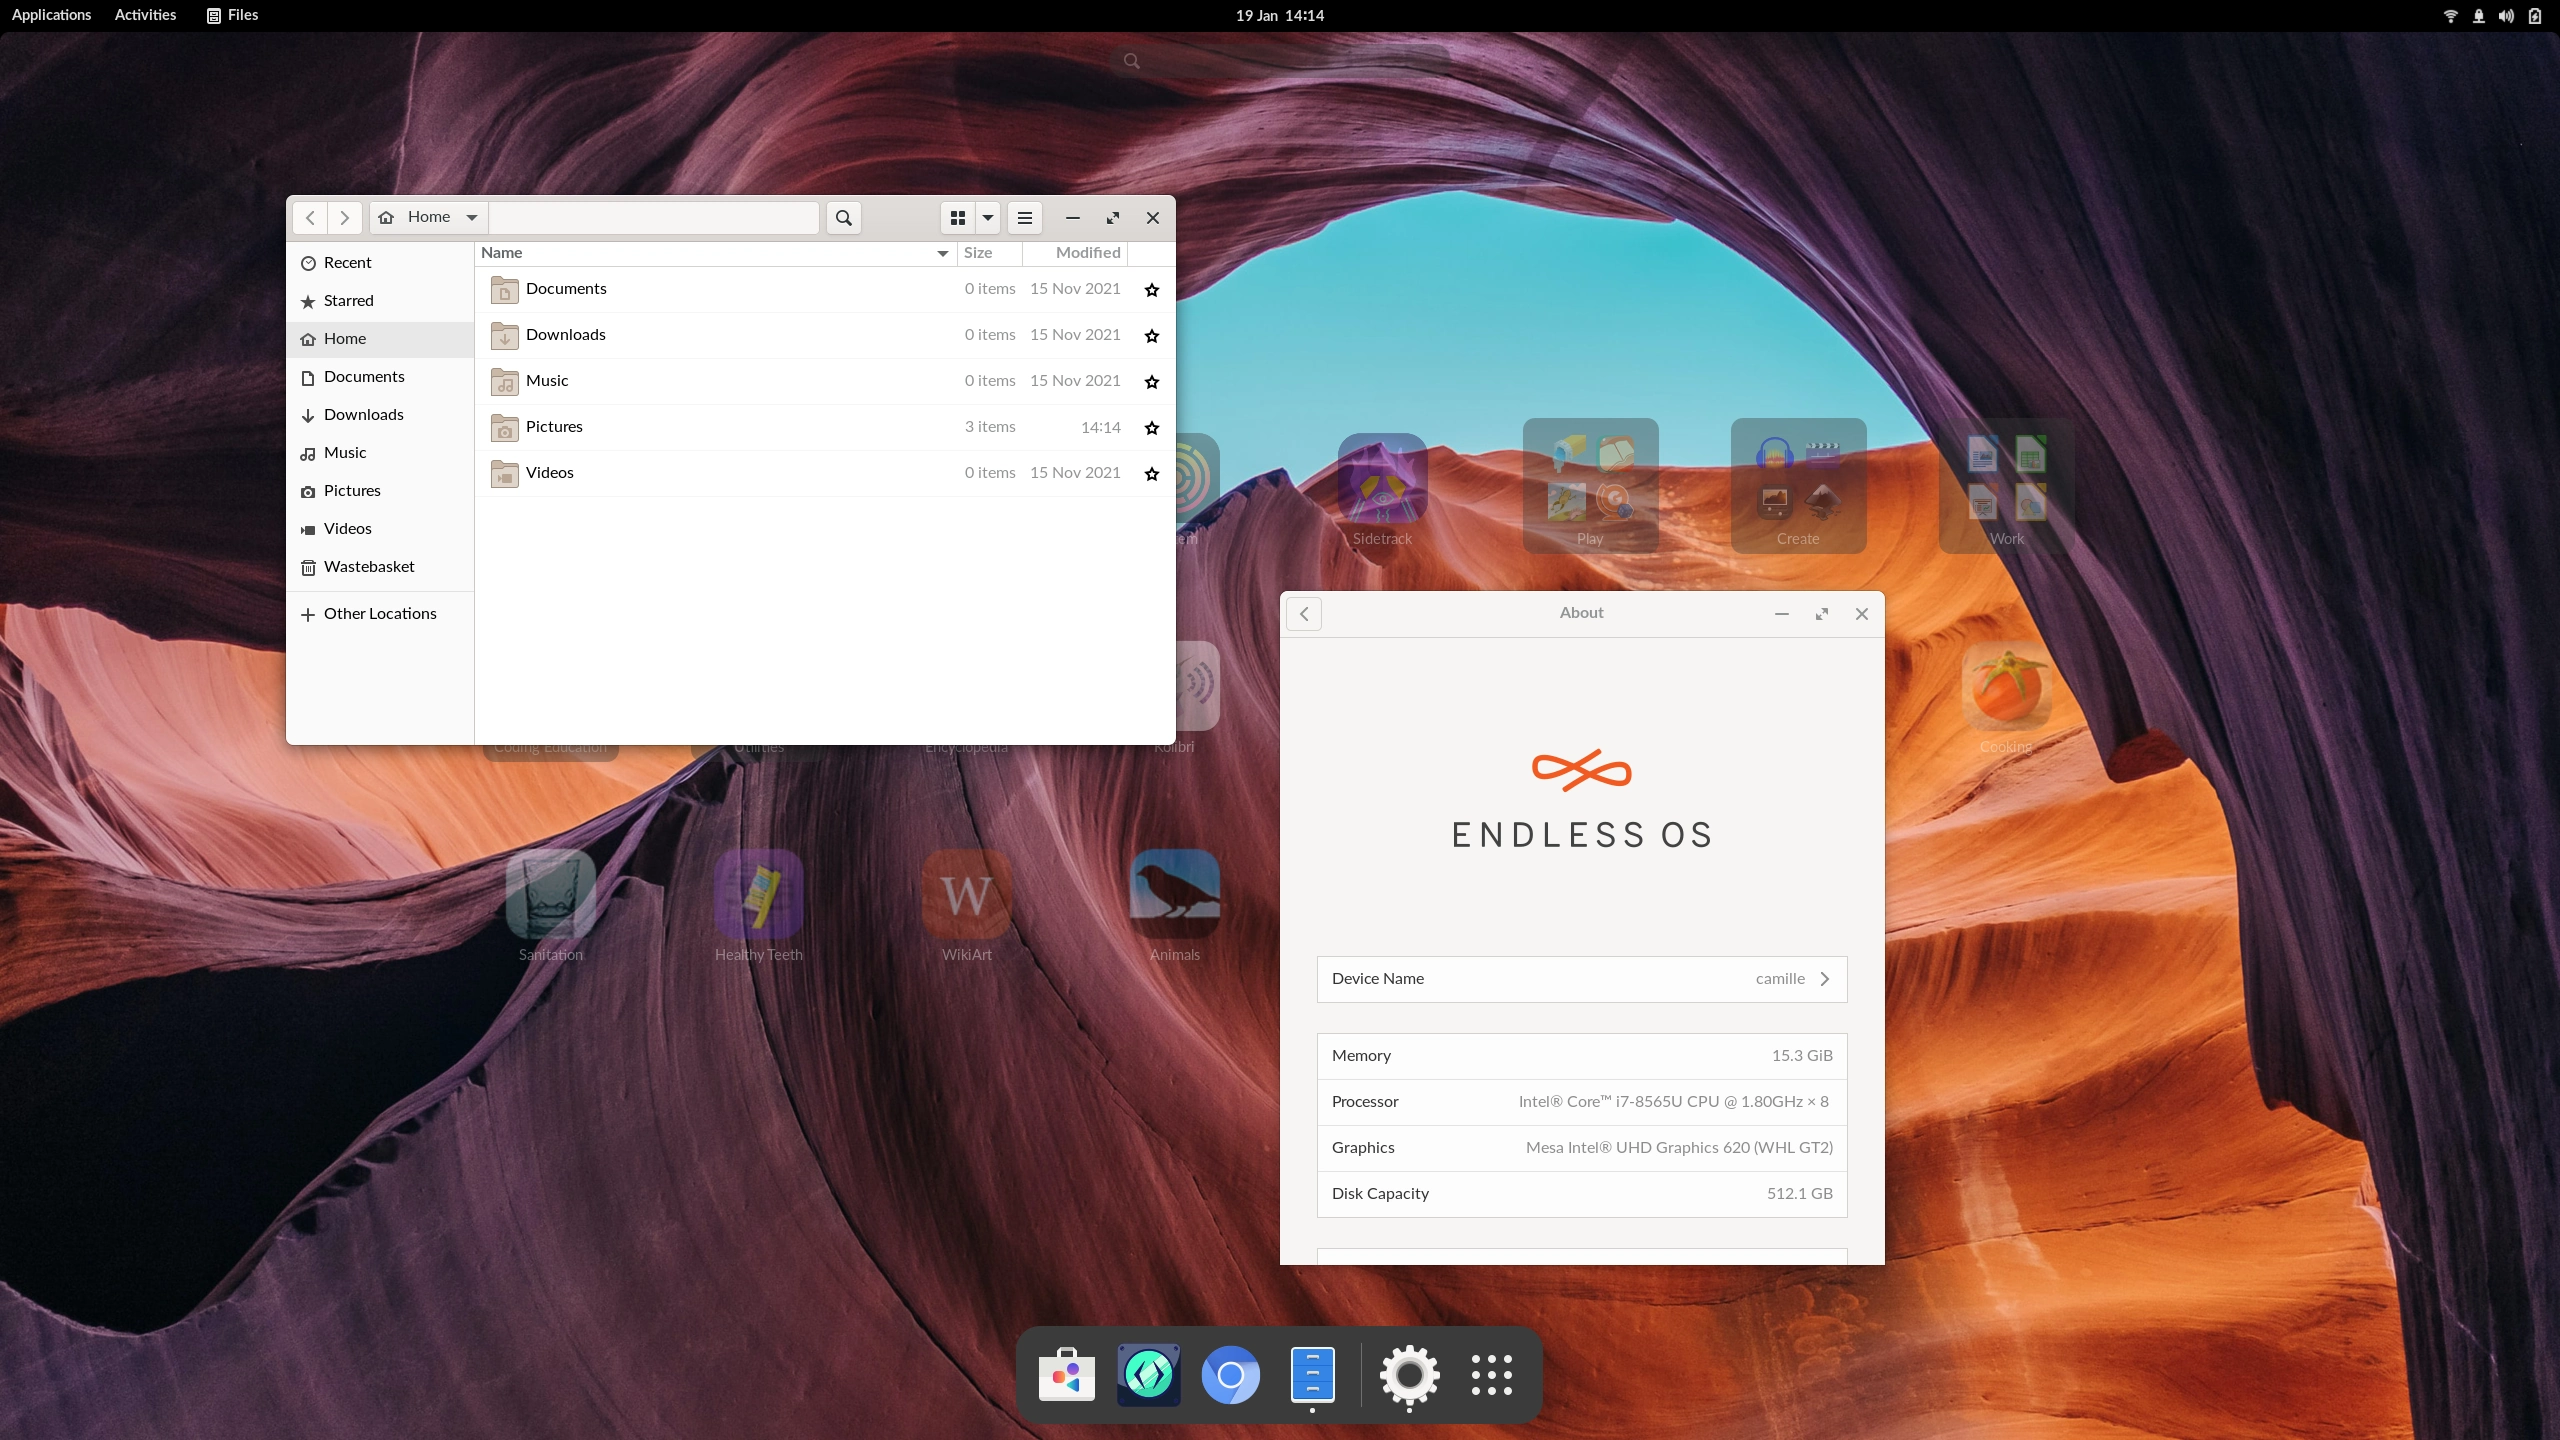 Endless OS 5.0 Beta Is Here with a New Desktop Interface and Wayland Support